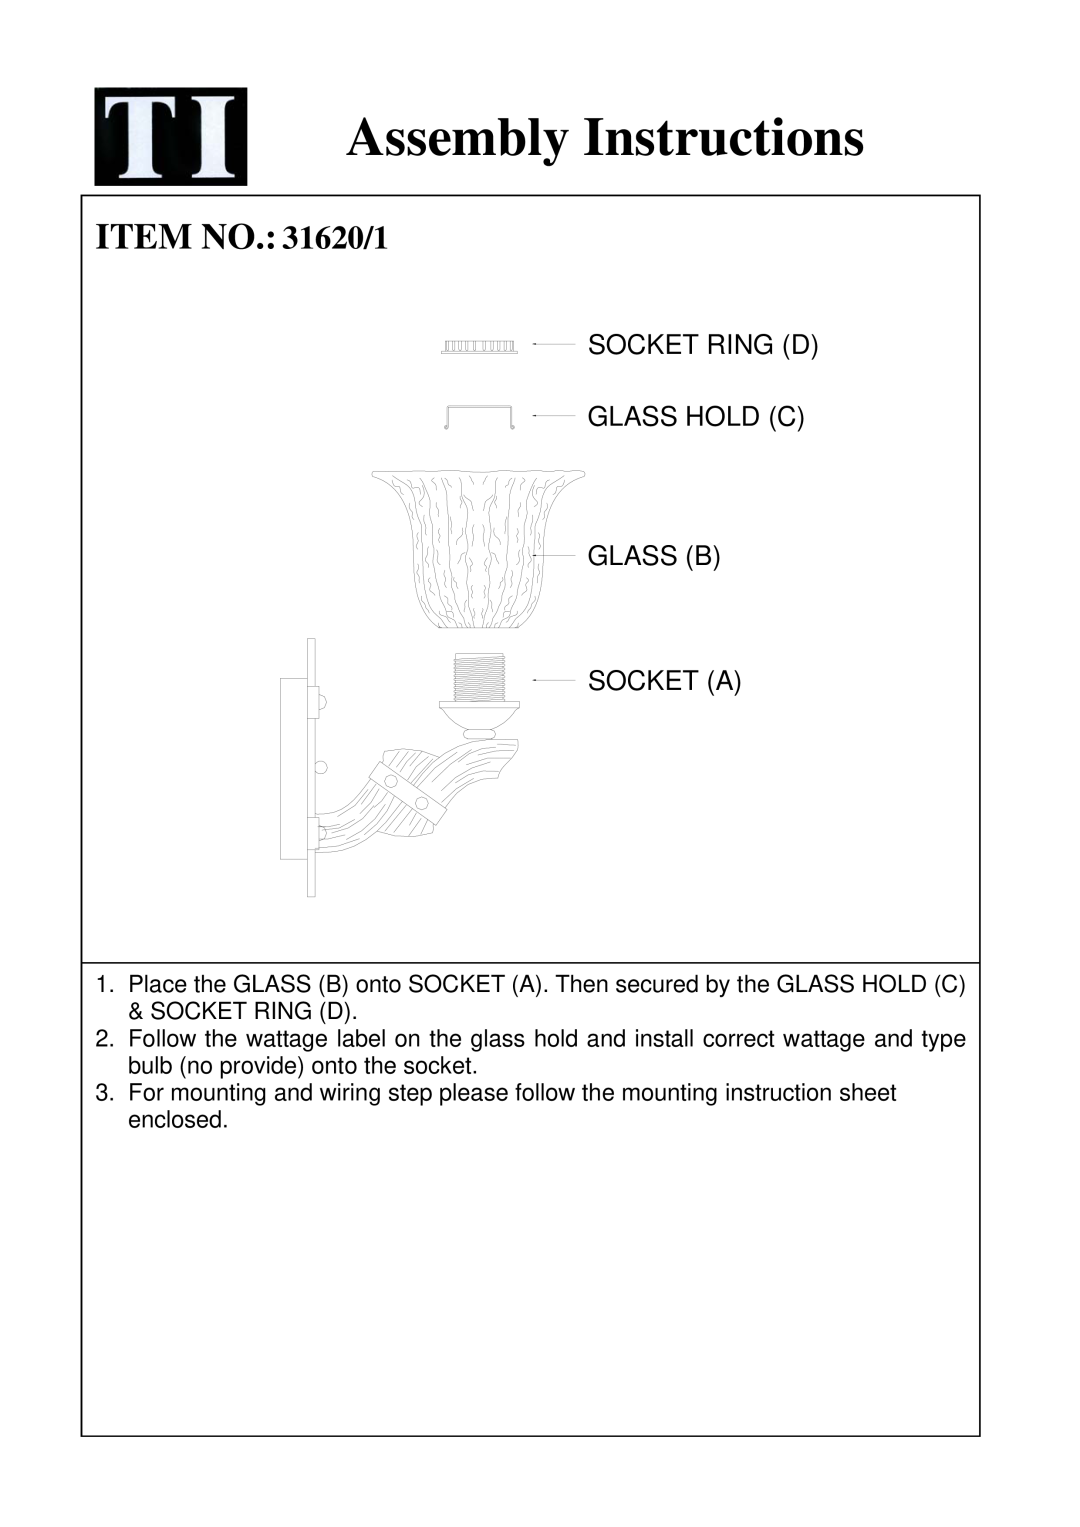 Triarch 31621 instruction sheet Assembly Instructions, ITEM NO. 31620/1, Socket Ring D Glass Hold C Glass B Socket A 